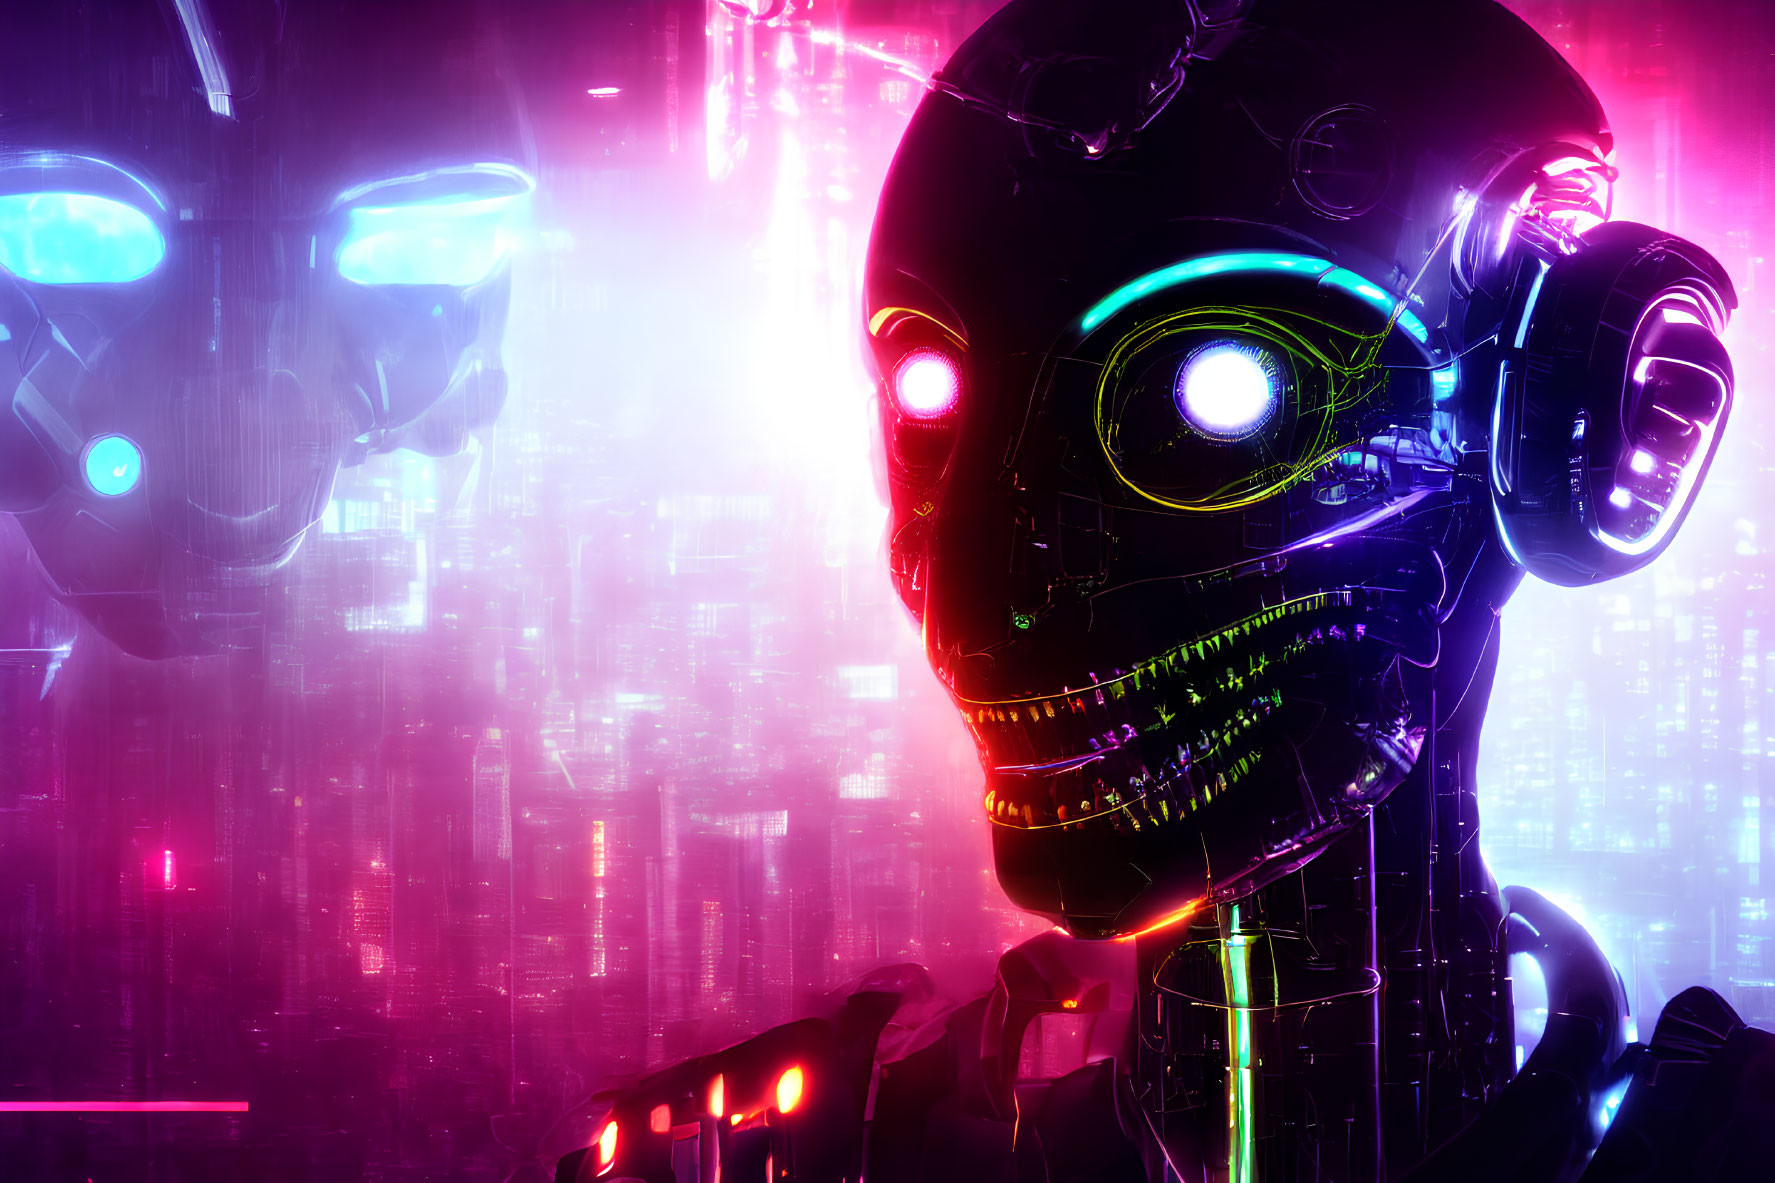 Futuristic digital artwork featuring stylized robotic faces on neon backdrop